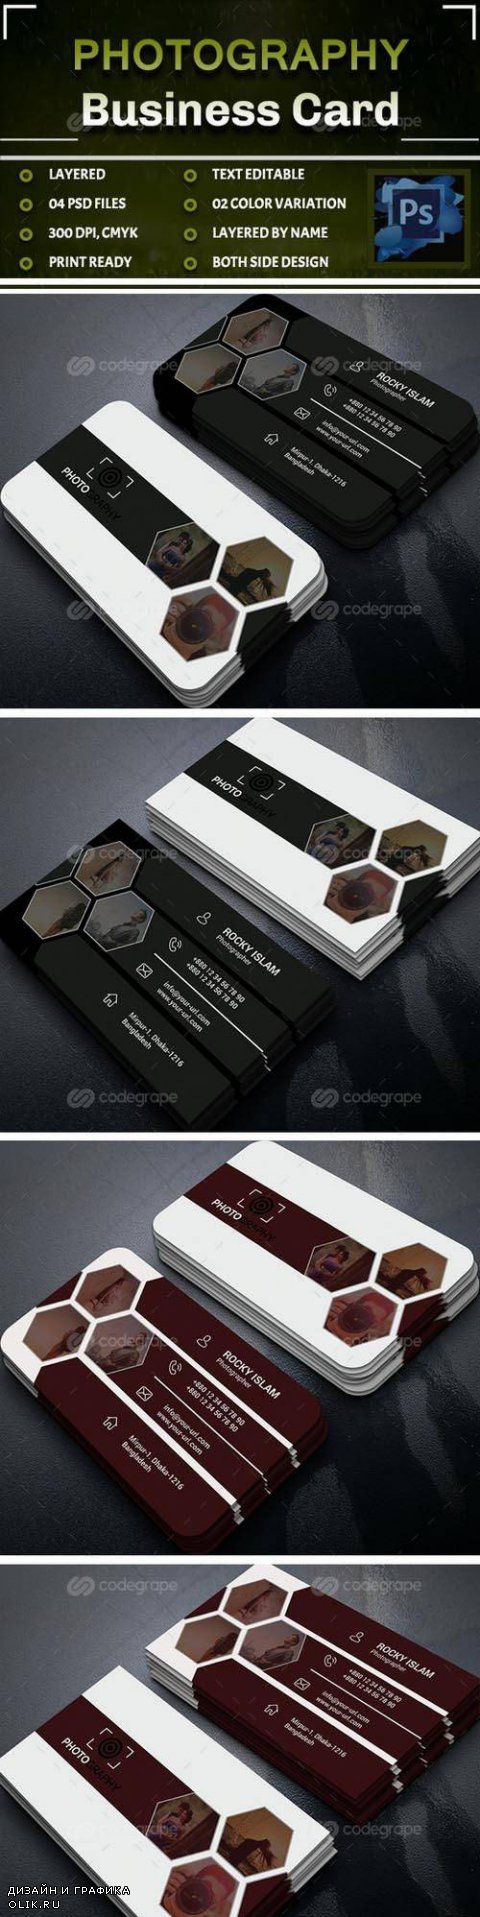 Photography Business Card 11233